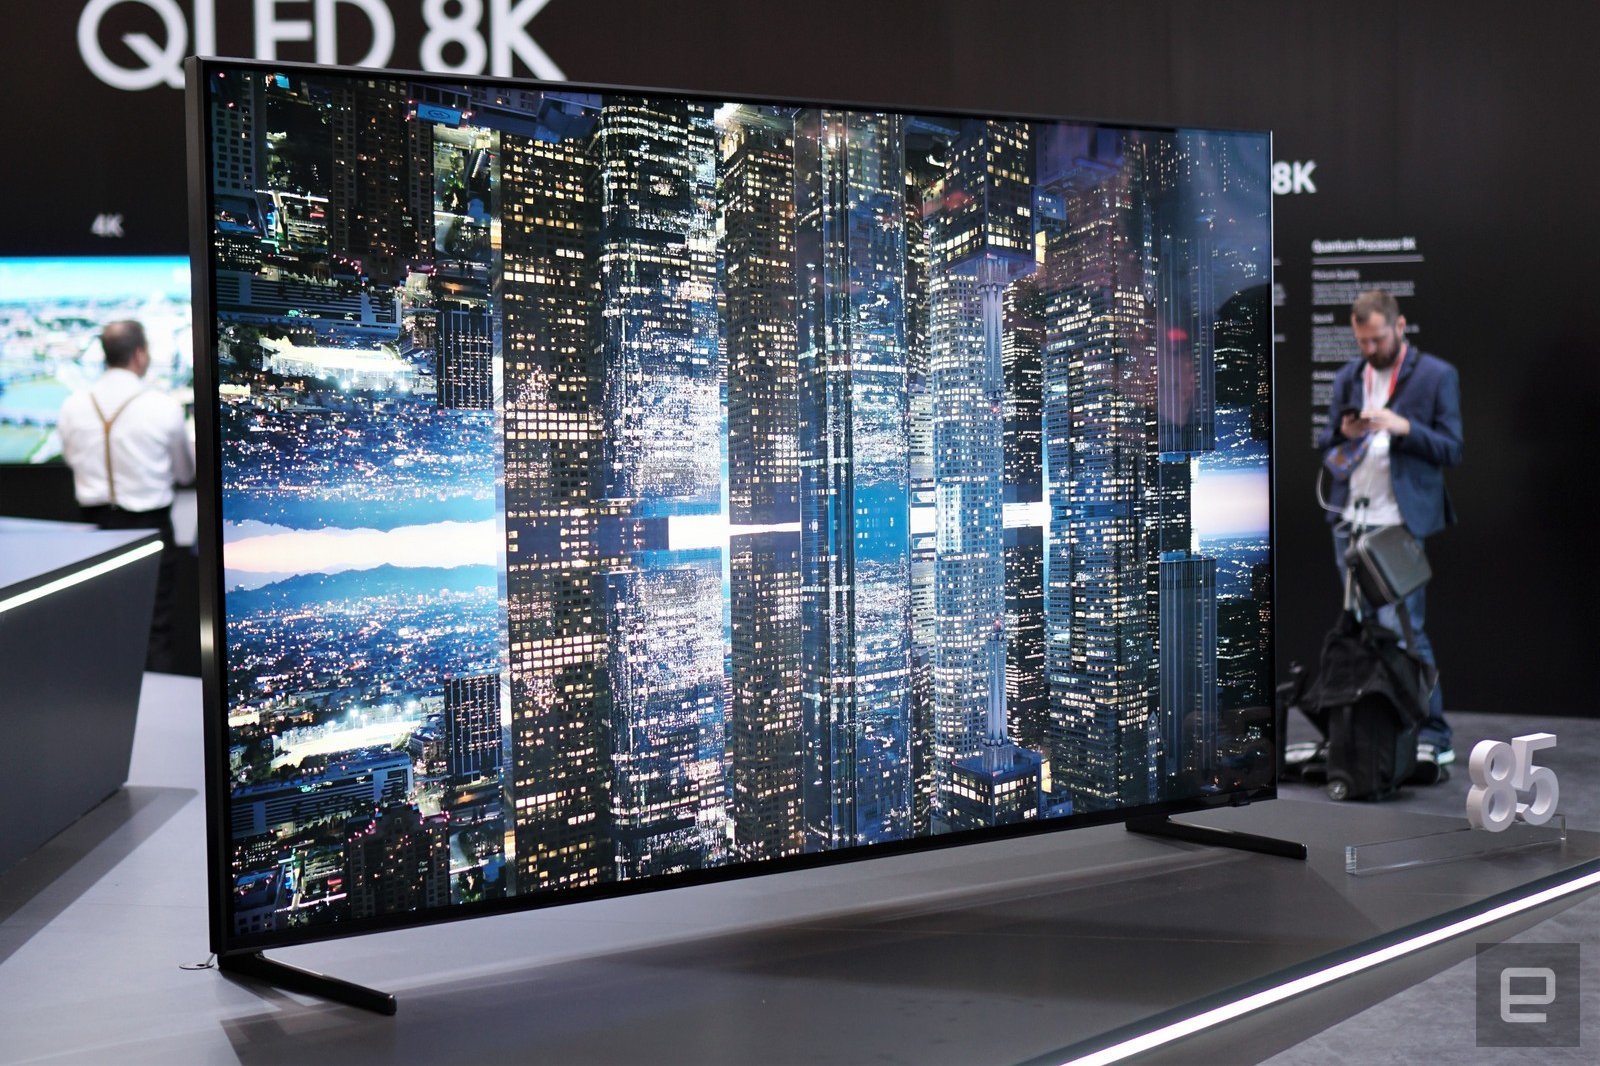   An 8K TV from Samsung  image - Engadget 